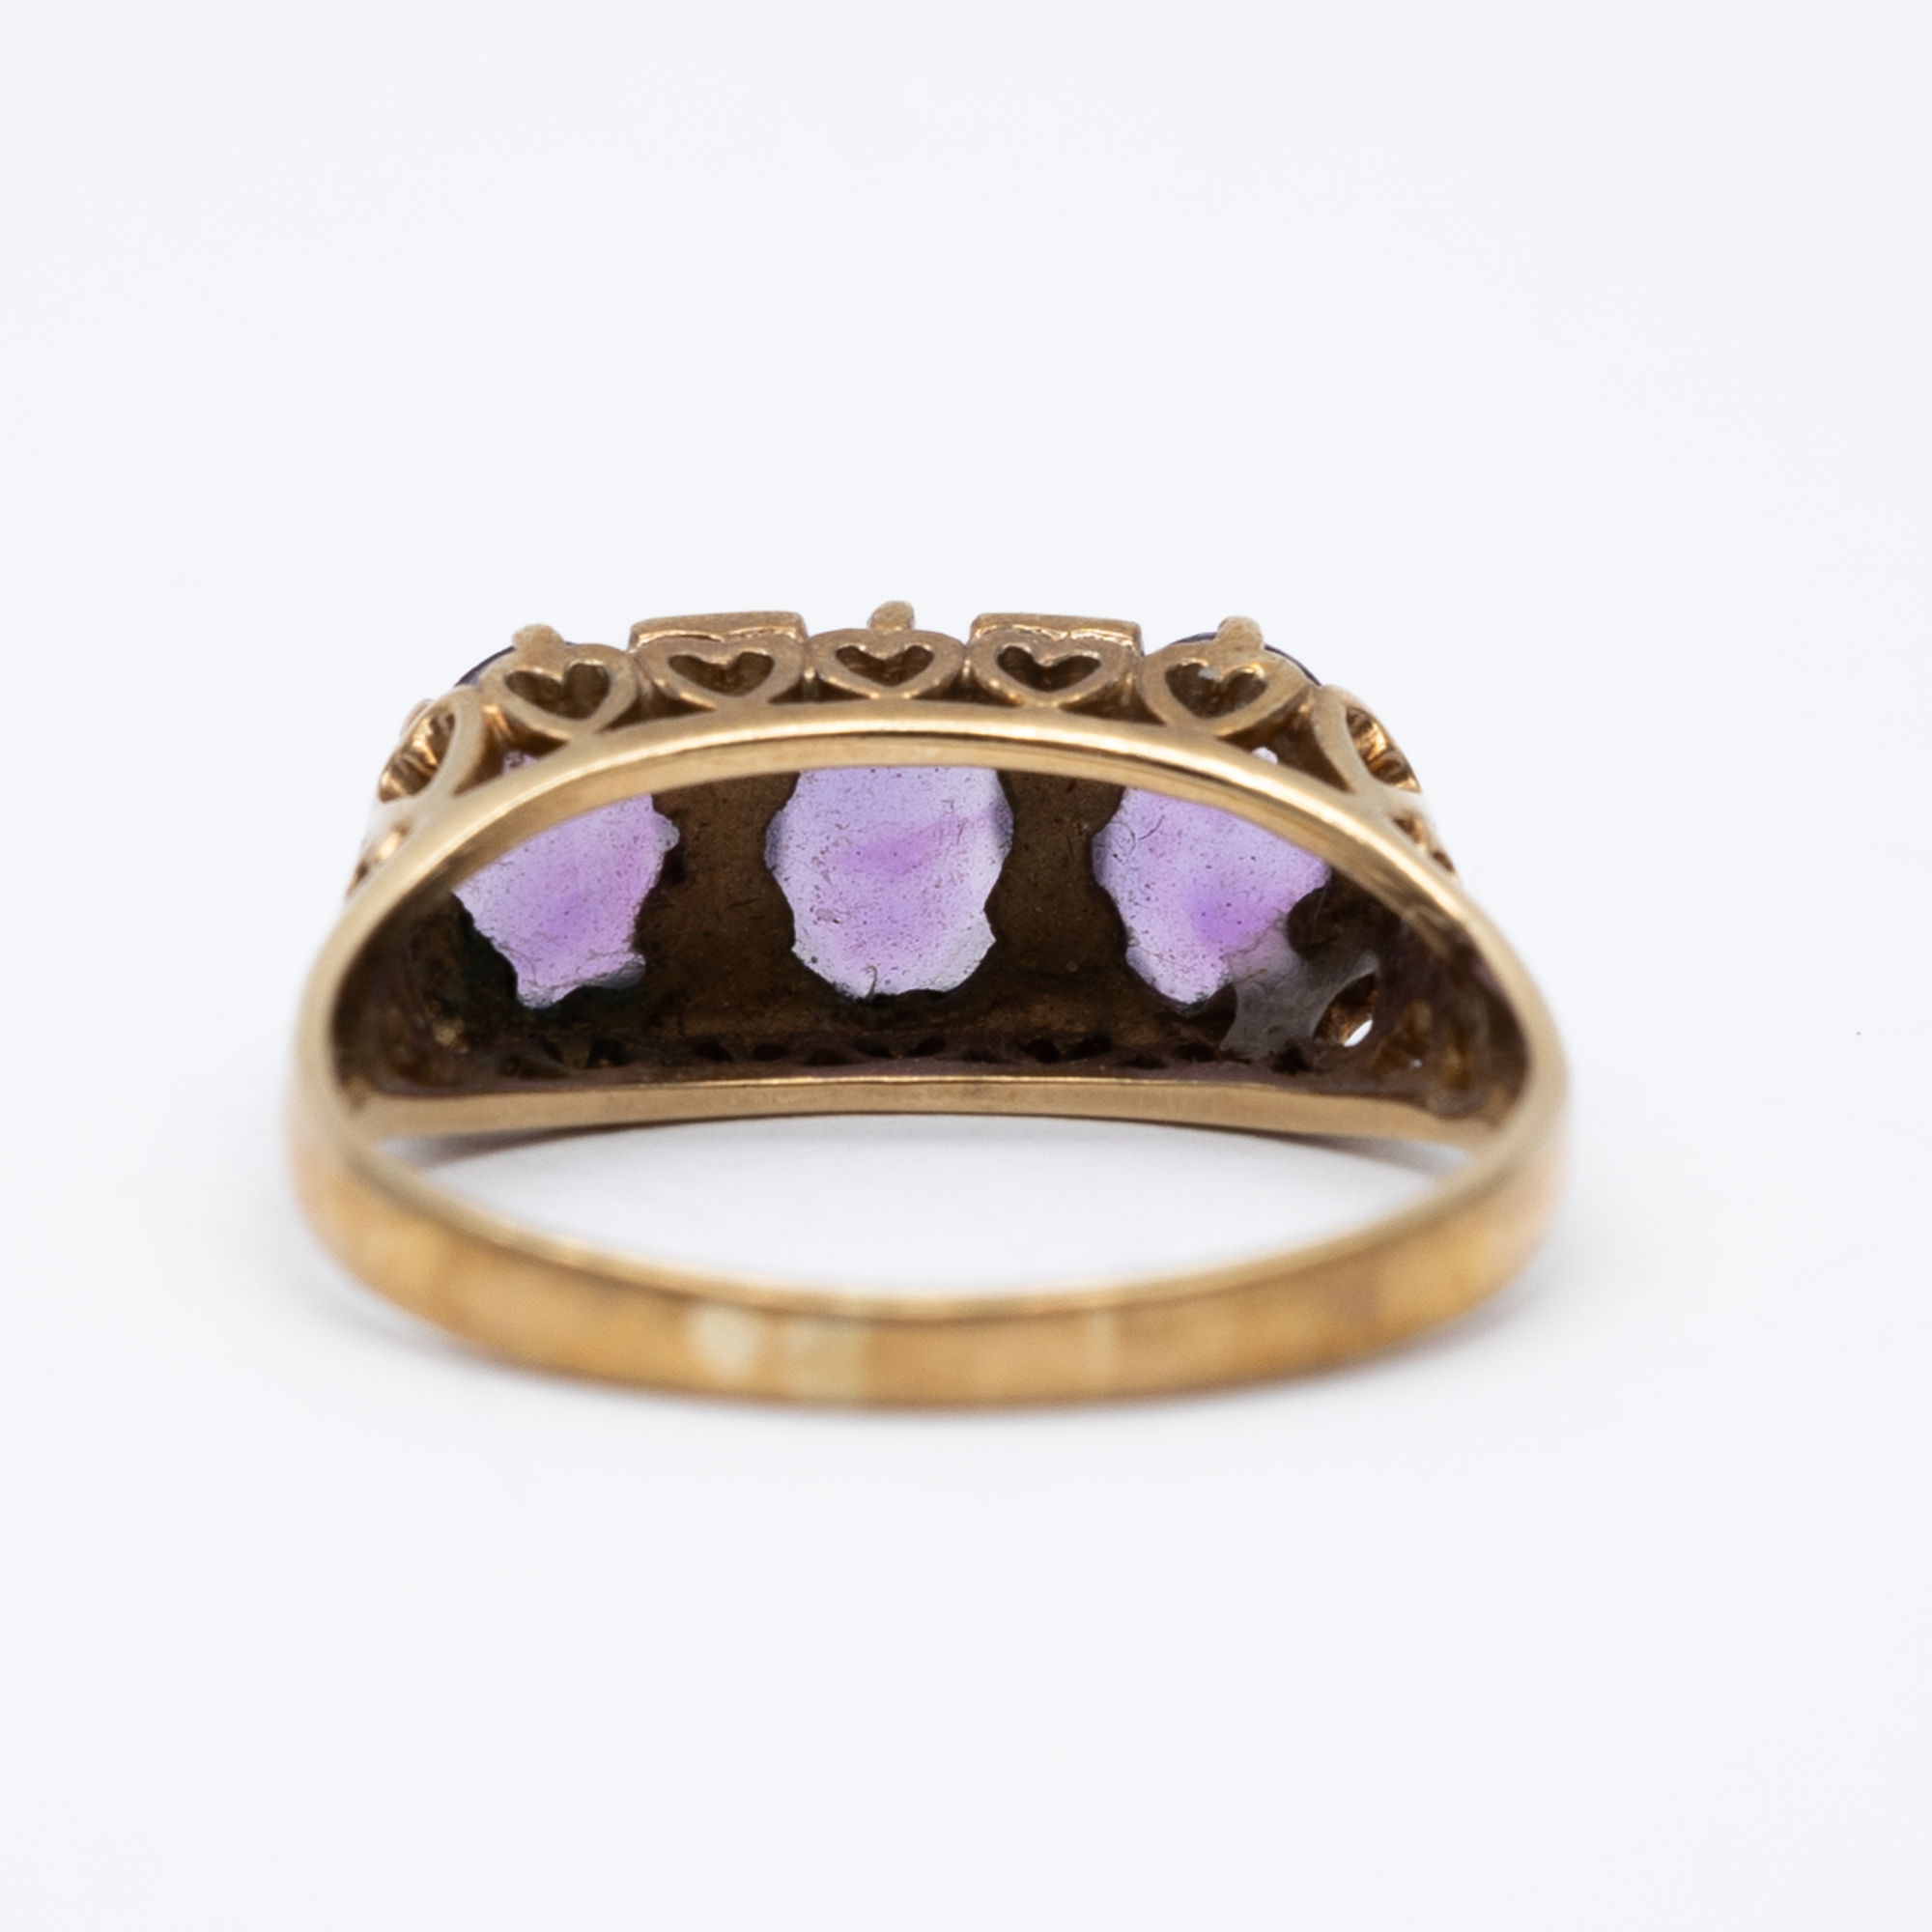 A 9ct yellow gold 3 stone amethyst ring - Image 3 of 6